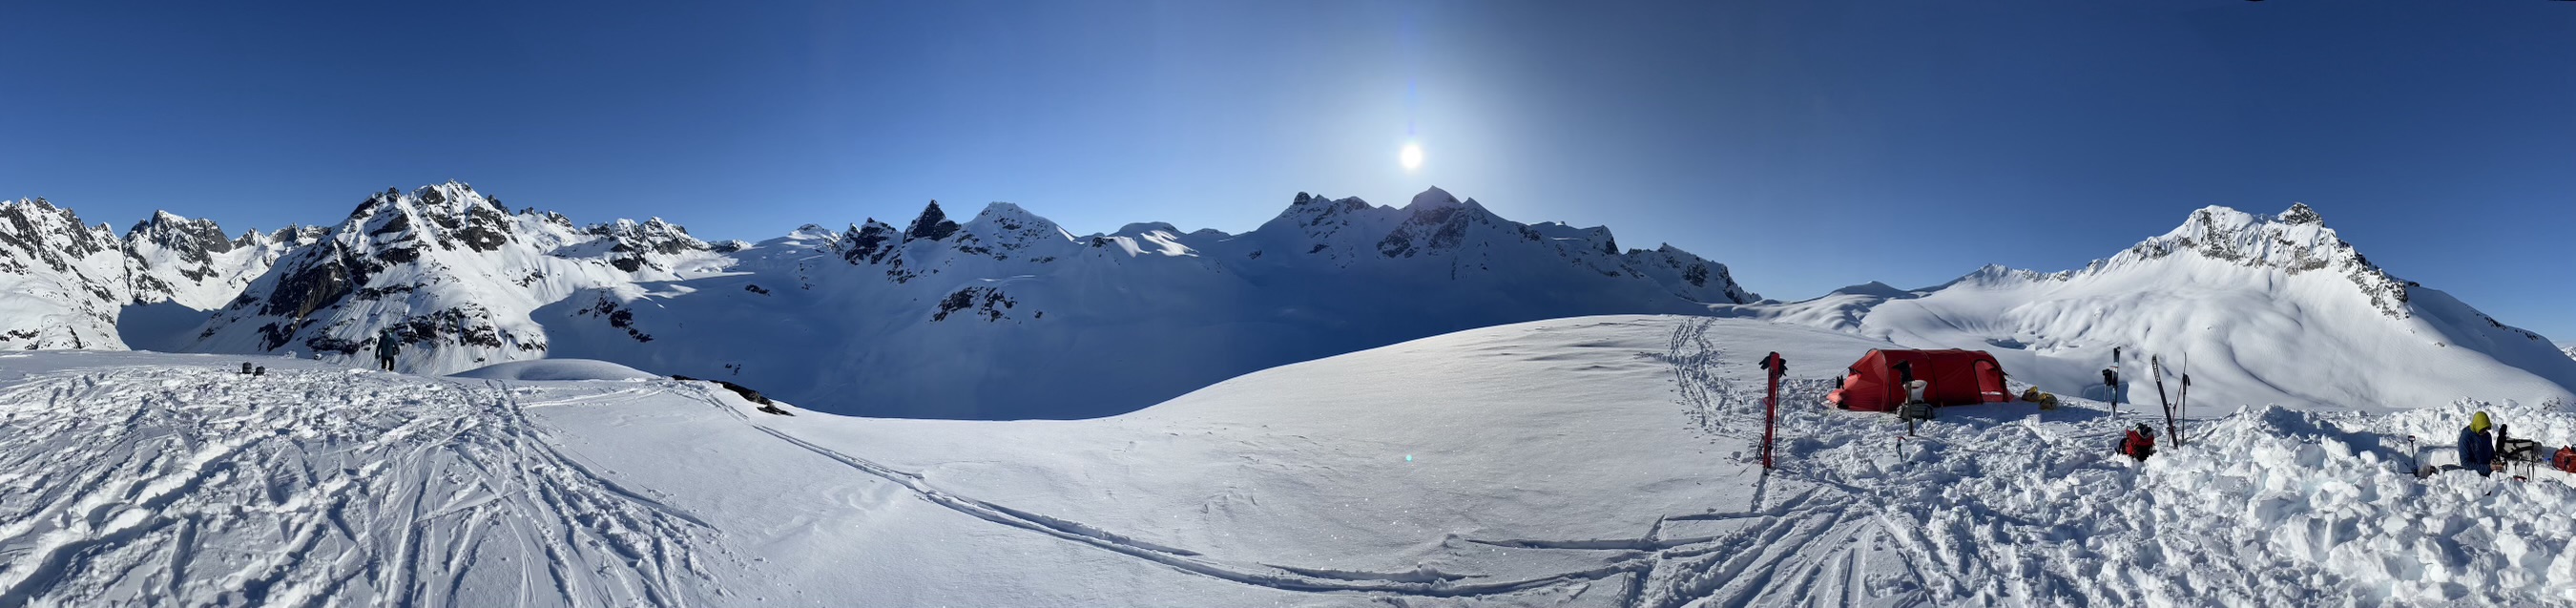 Panoramic image of a mountain range with a tent camp and many ski tracks in the snow